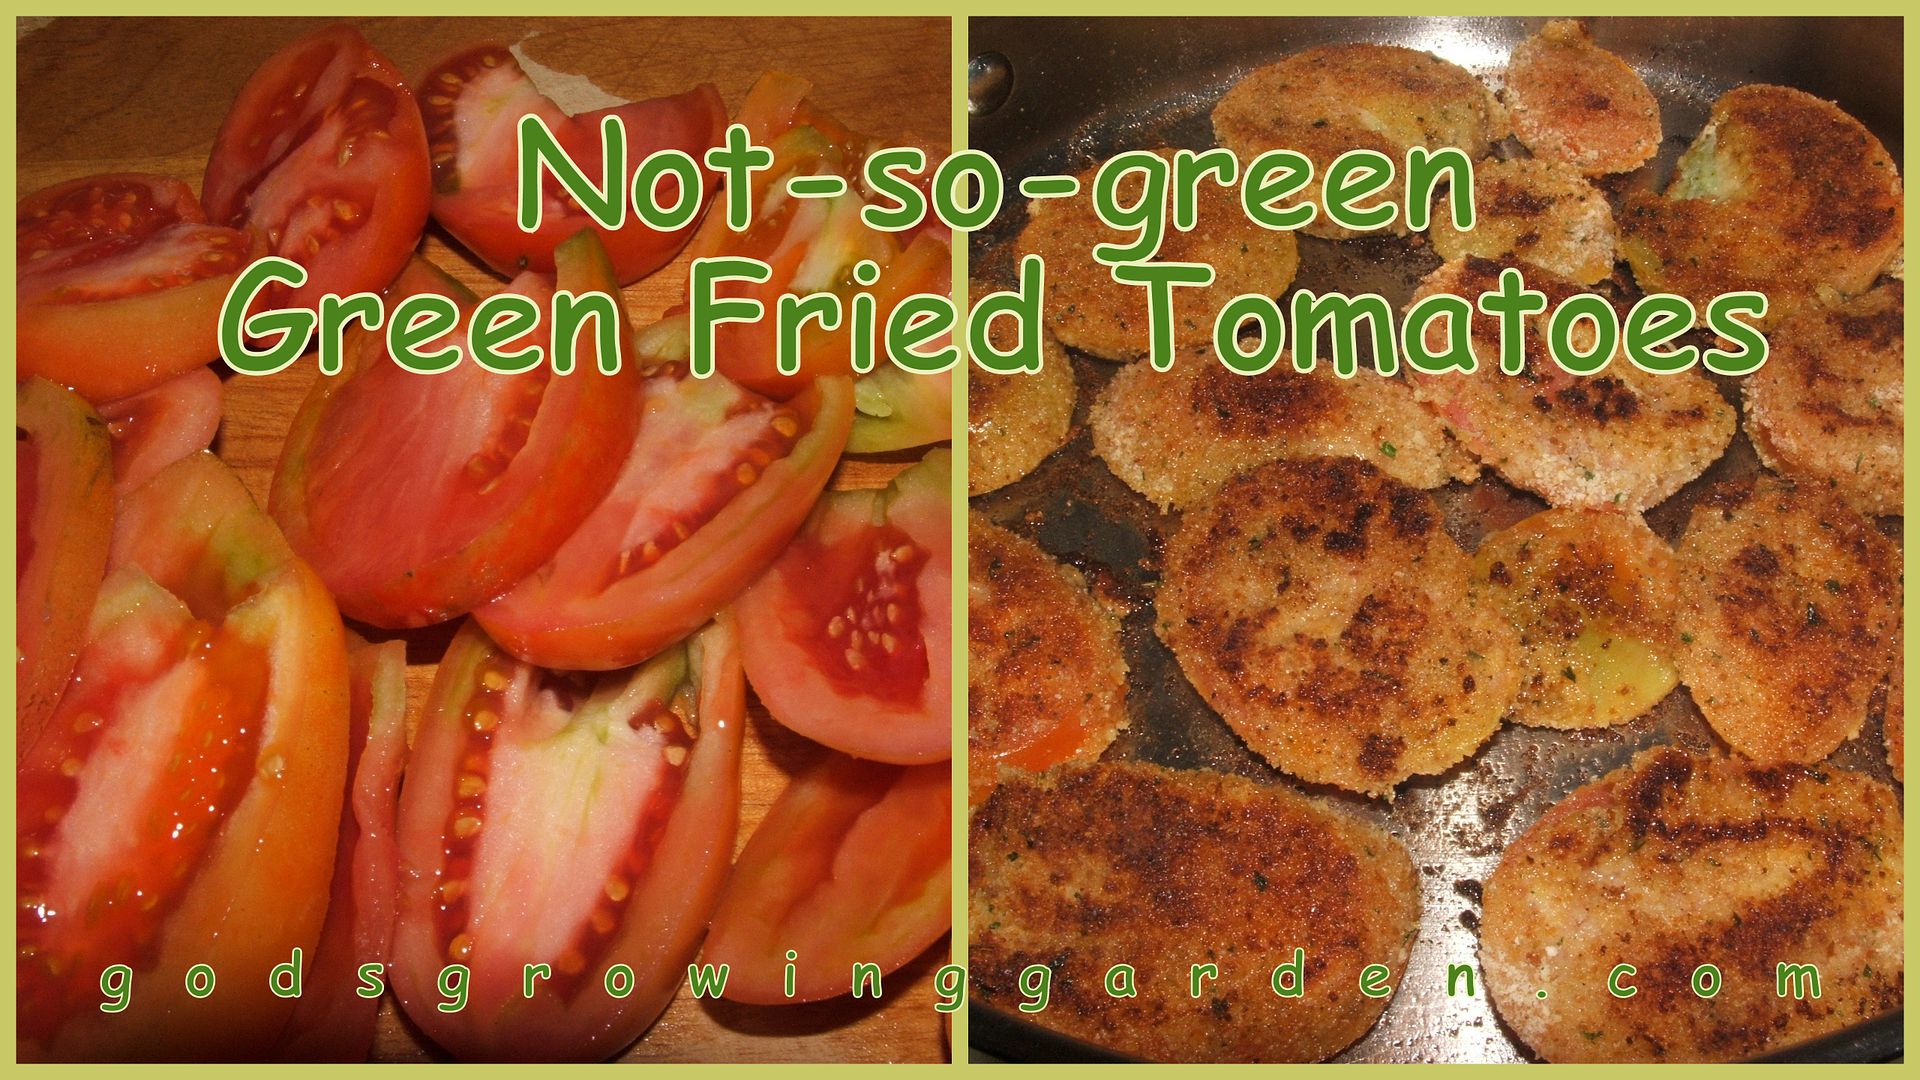 Green Fried Tomatoes by Angie Ouellette-Tower for godsgrowinggarden.com photo 2014-09-22_zps6c5dc04b.jpg